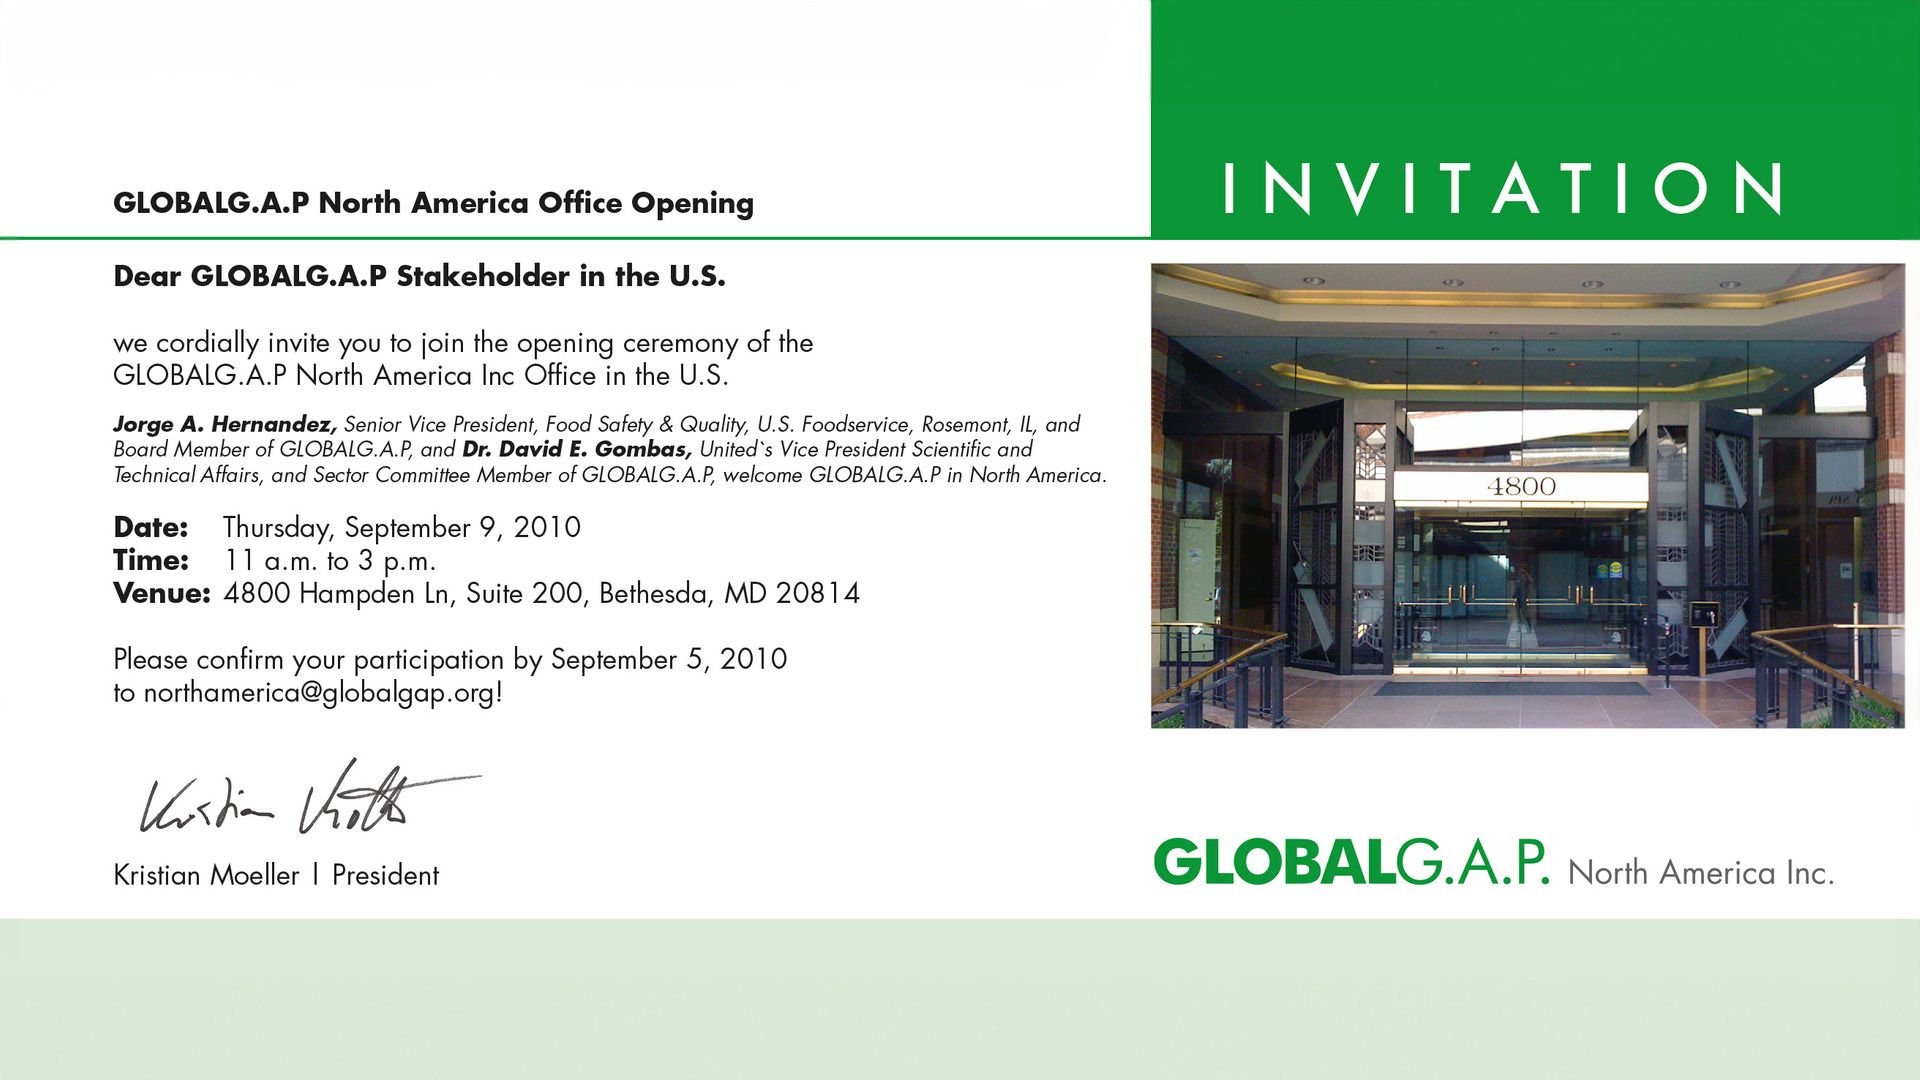 An invitation to the opening ceremony of the GLOBALG.A.P. North America Inc. office in 2010